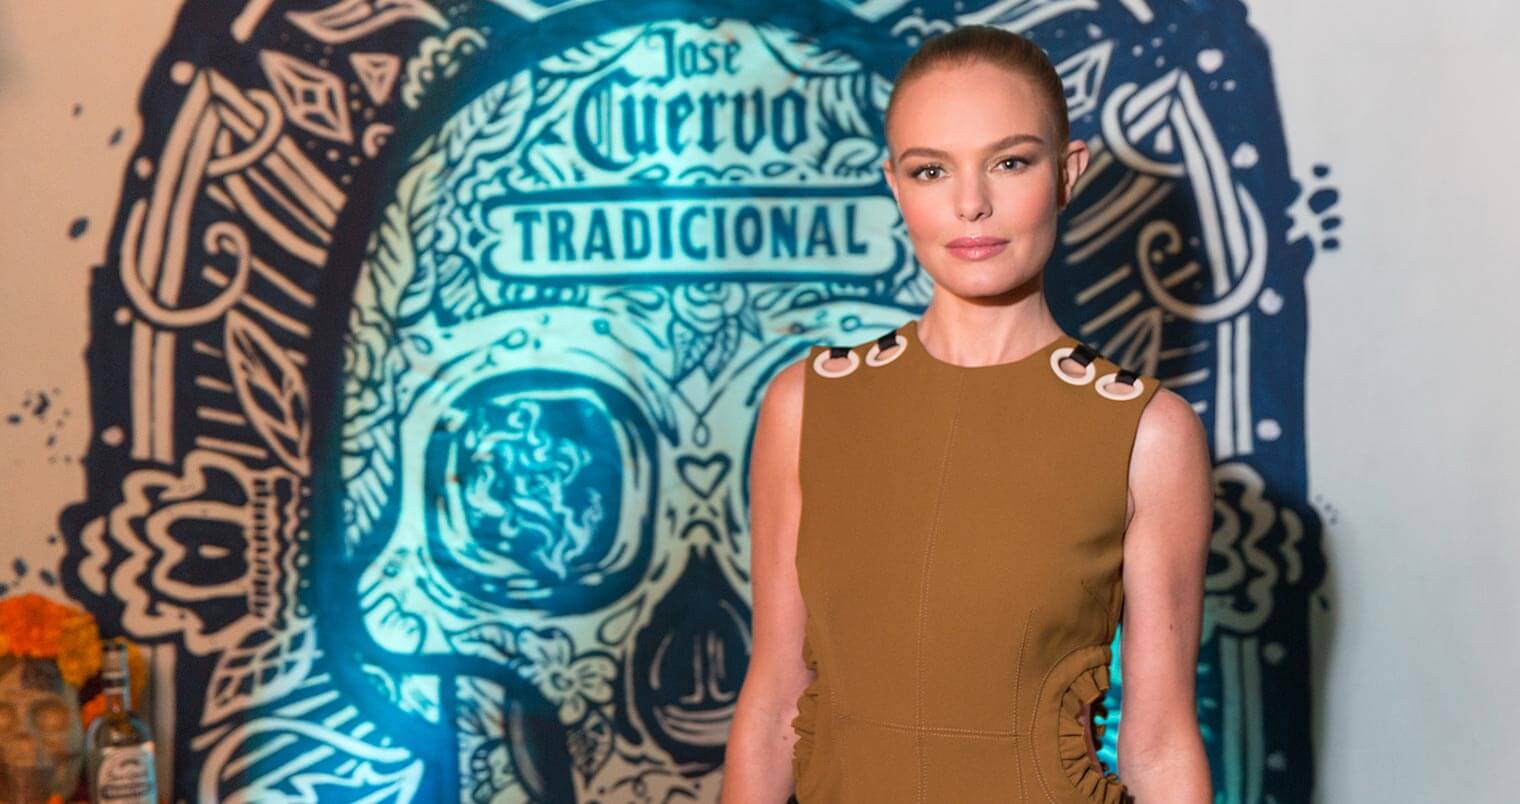 Jose Cuervo Launches Dia de los Muertos Tradicional Bottle with Kate Bosworth, Nina Agdal, and Michael Polish, featured image